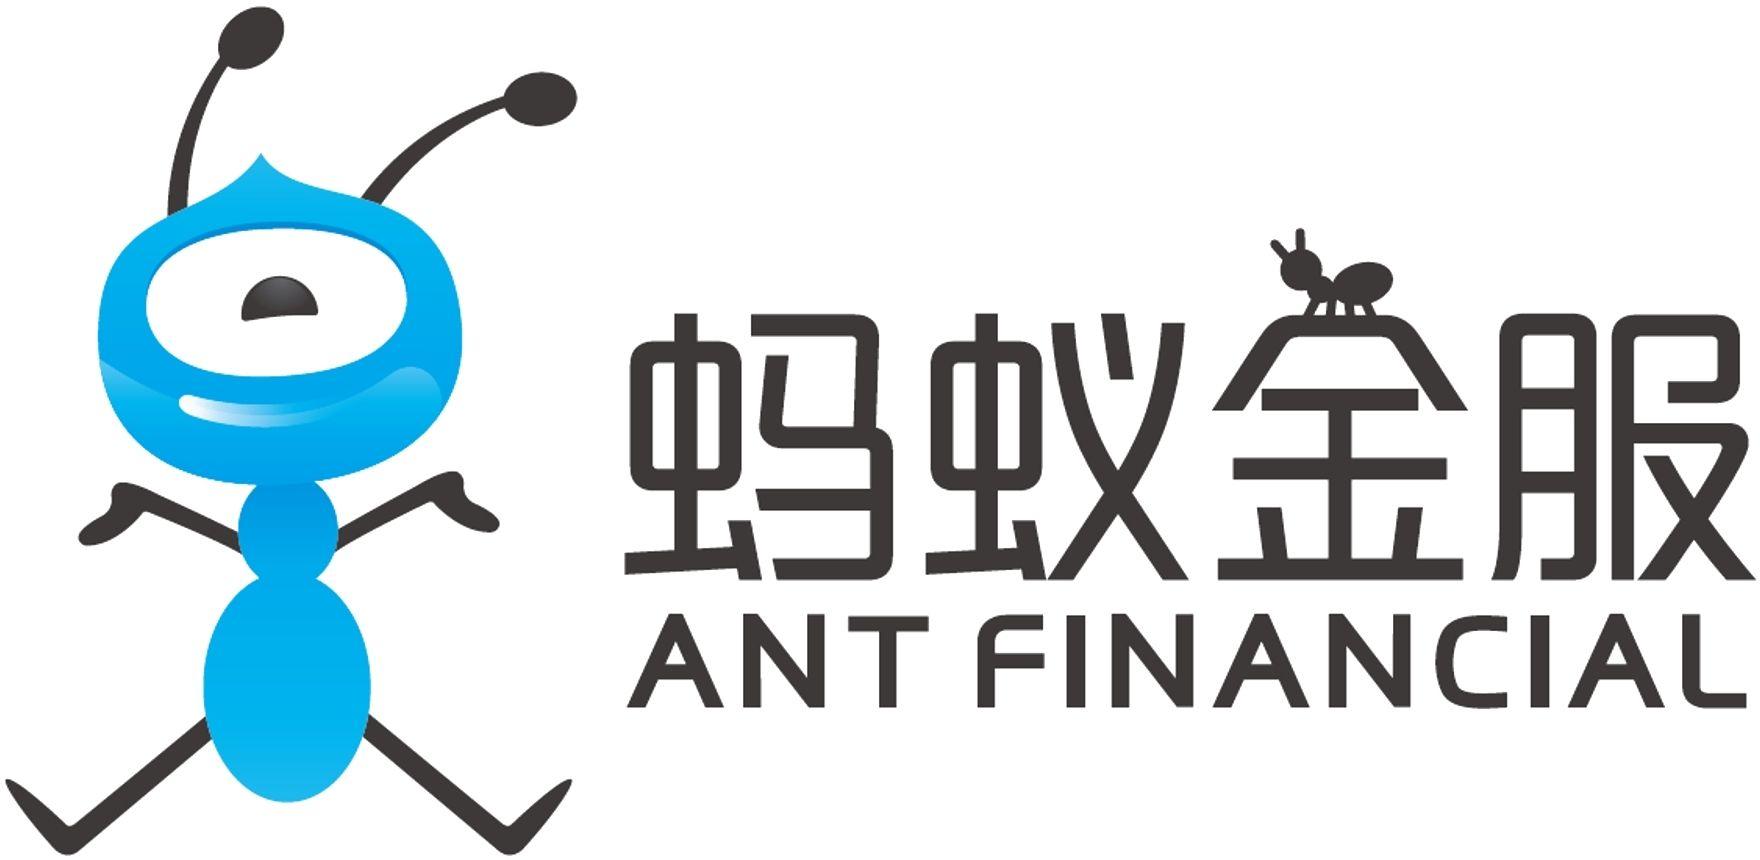 Ant Financial Logo - Alibaba Group Agrees to 33% Equity Stake in Ant Financial | Business ...